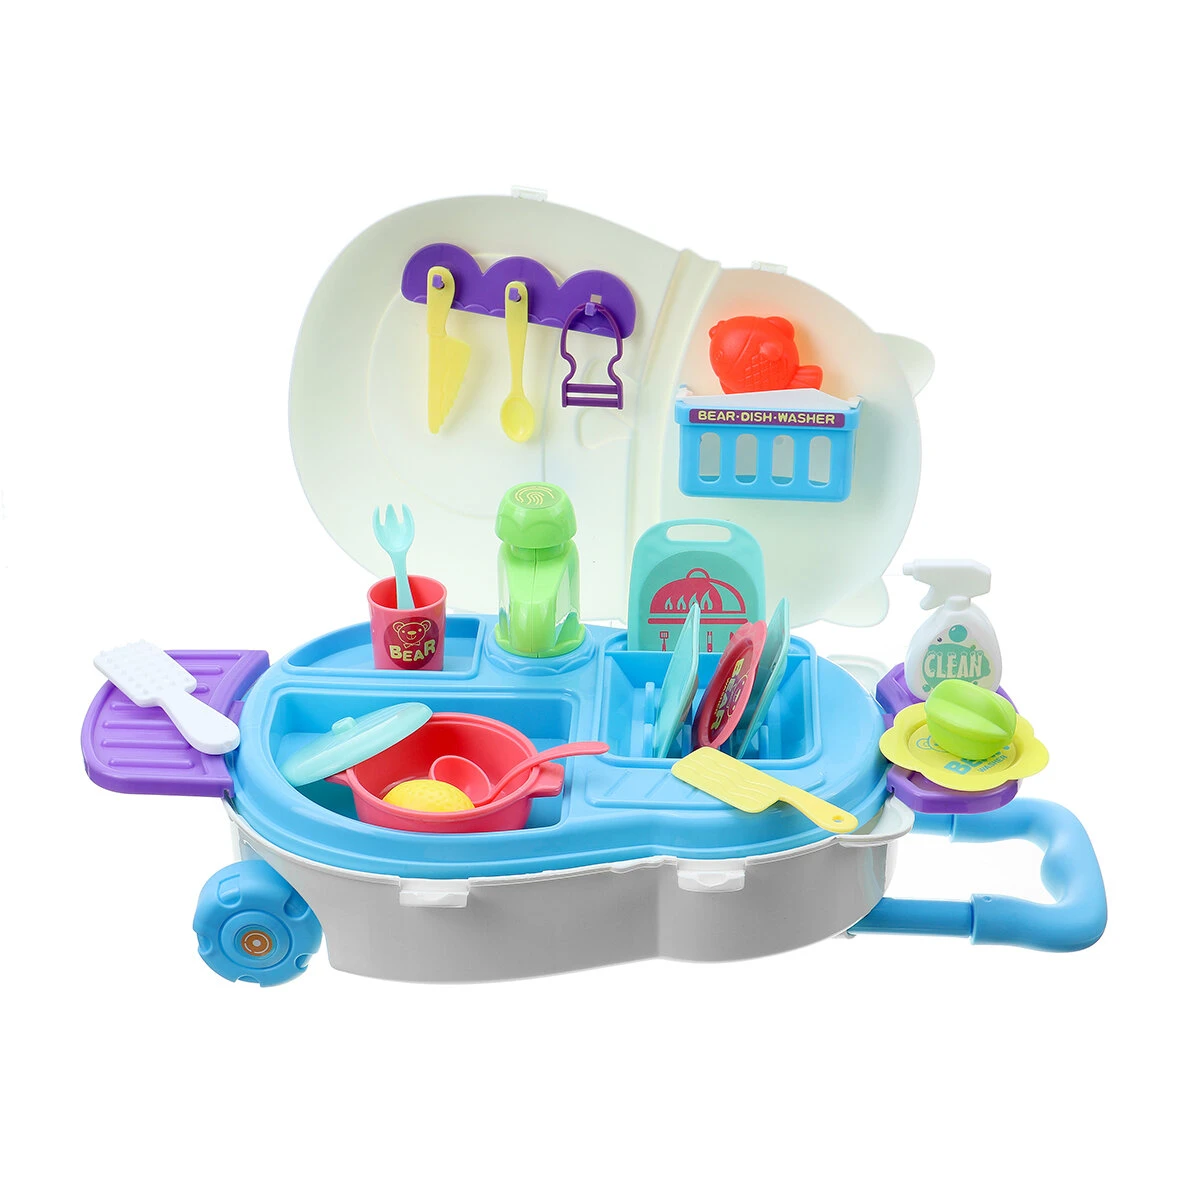 Kids kitchen dishwasher playing sink dishes toys play pretend play toy set